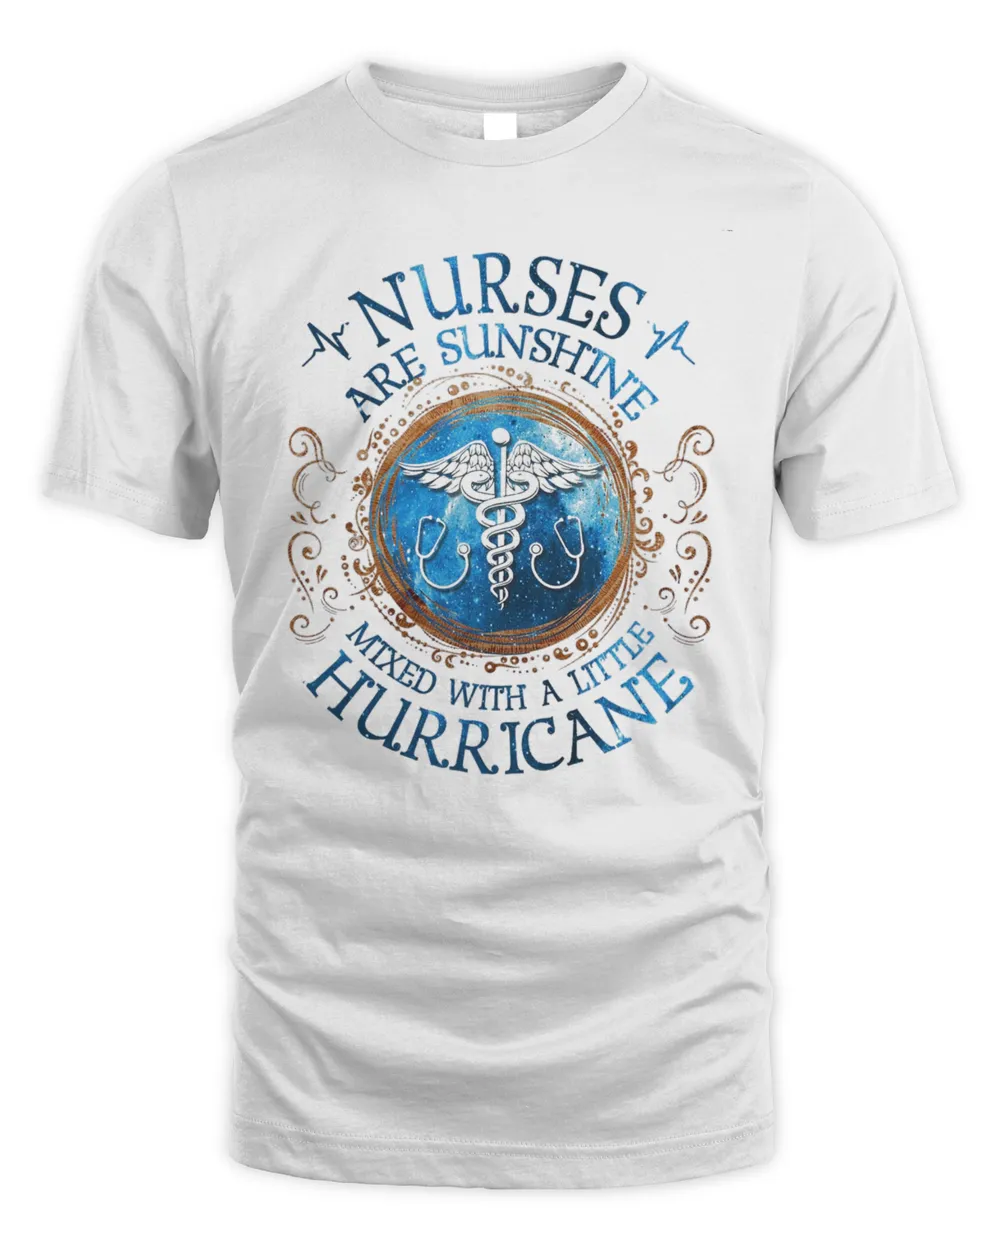 Nurses Are Sunshine Mixed With A Little Hurricane Shirt